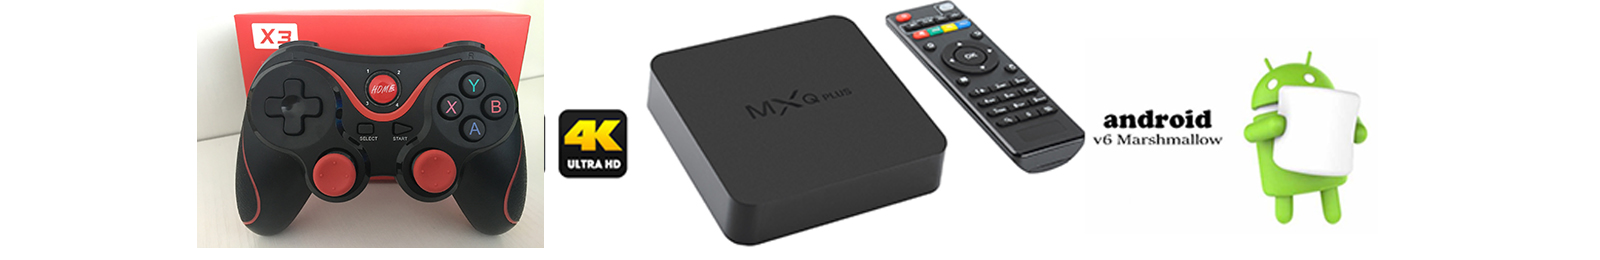 Android TV Box Supplier, Android TV Box Manufacturer, Android TV Box, Set Top Box, Smart TV Box, TV Box, TV Box Factory, MINI PC, Android TV Stick, Android TV Dongle, Windows TV Box, Top Supplier For Android Smart TV Box, Octa Core Android 6.0 TV Box, Amlogic Android TV Box, Android Powered TV Box, Intel MINI PC, Air Mouse Keyboard, Air Fly Mice, Mini Projector DLP, VR Android Based, Smart Watch, Electronics Gagdets